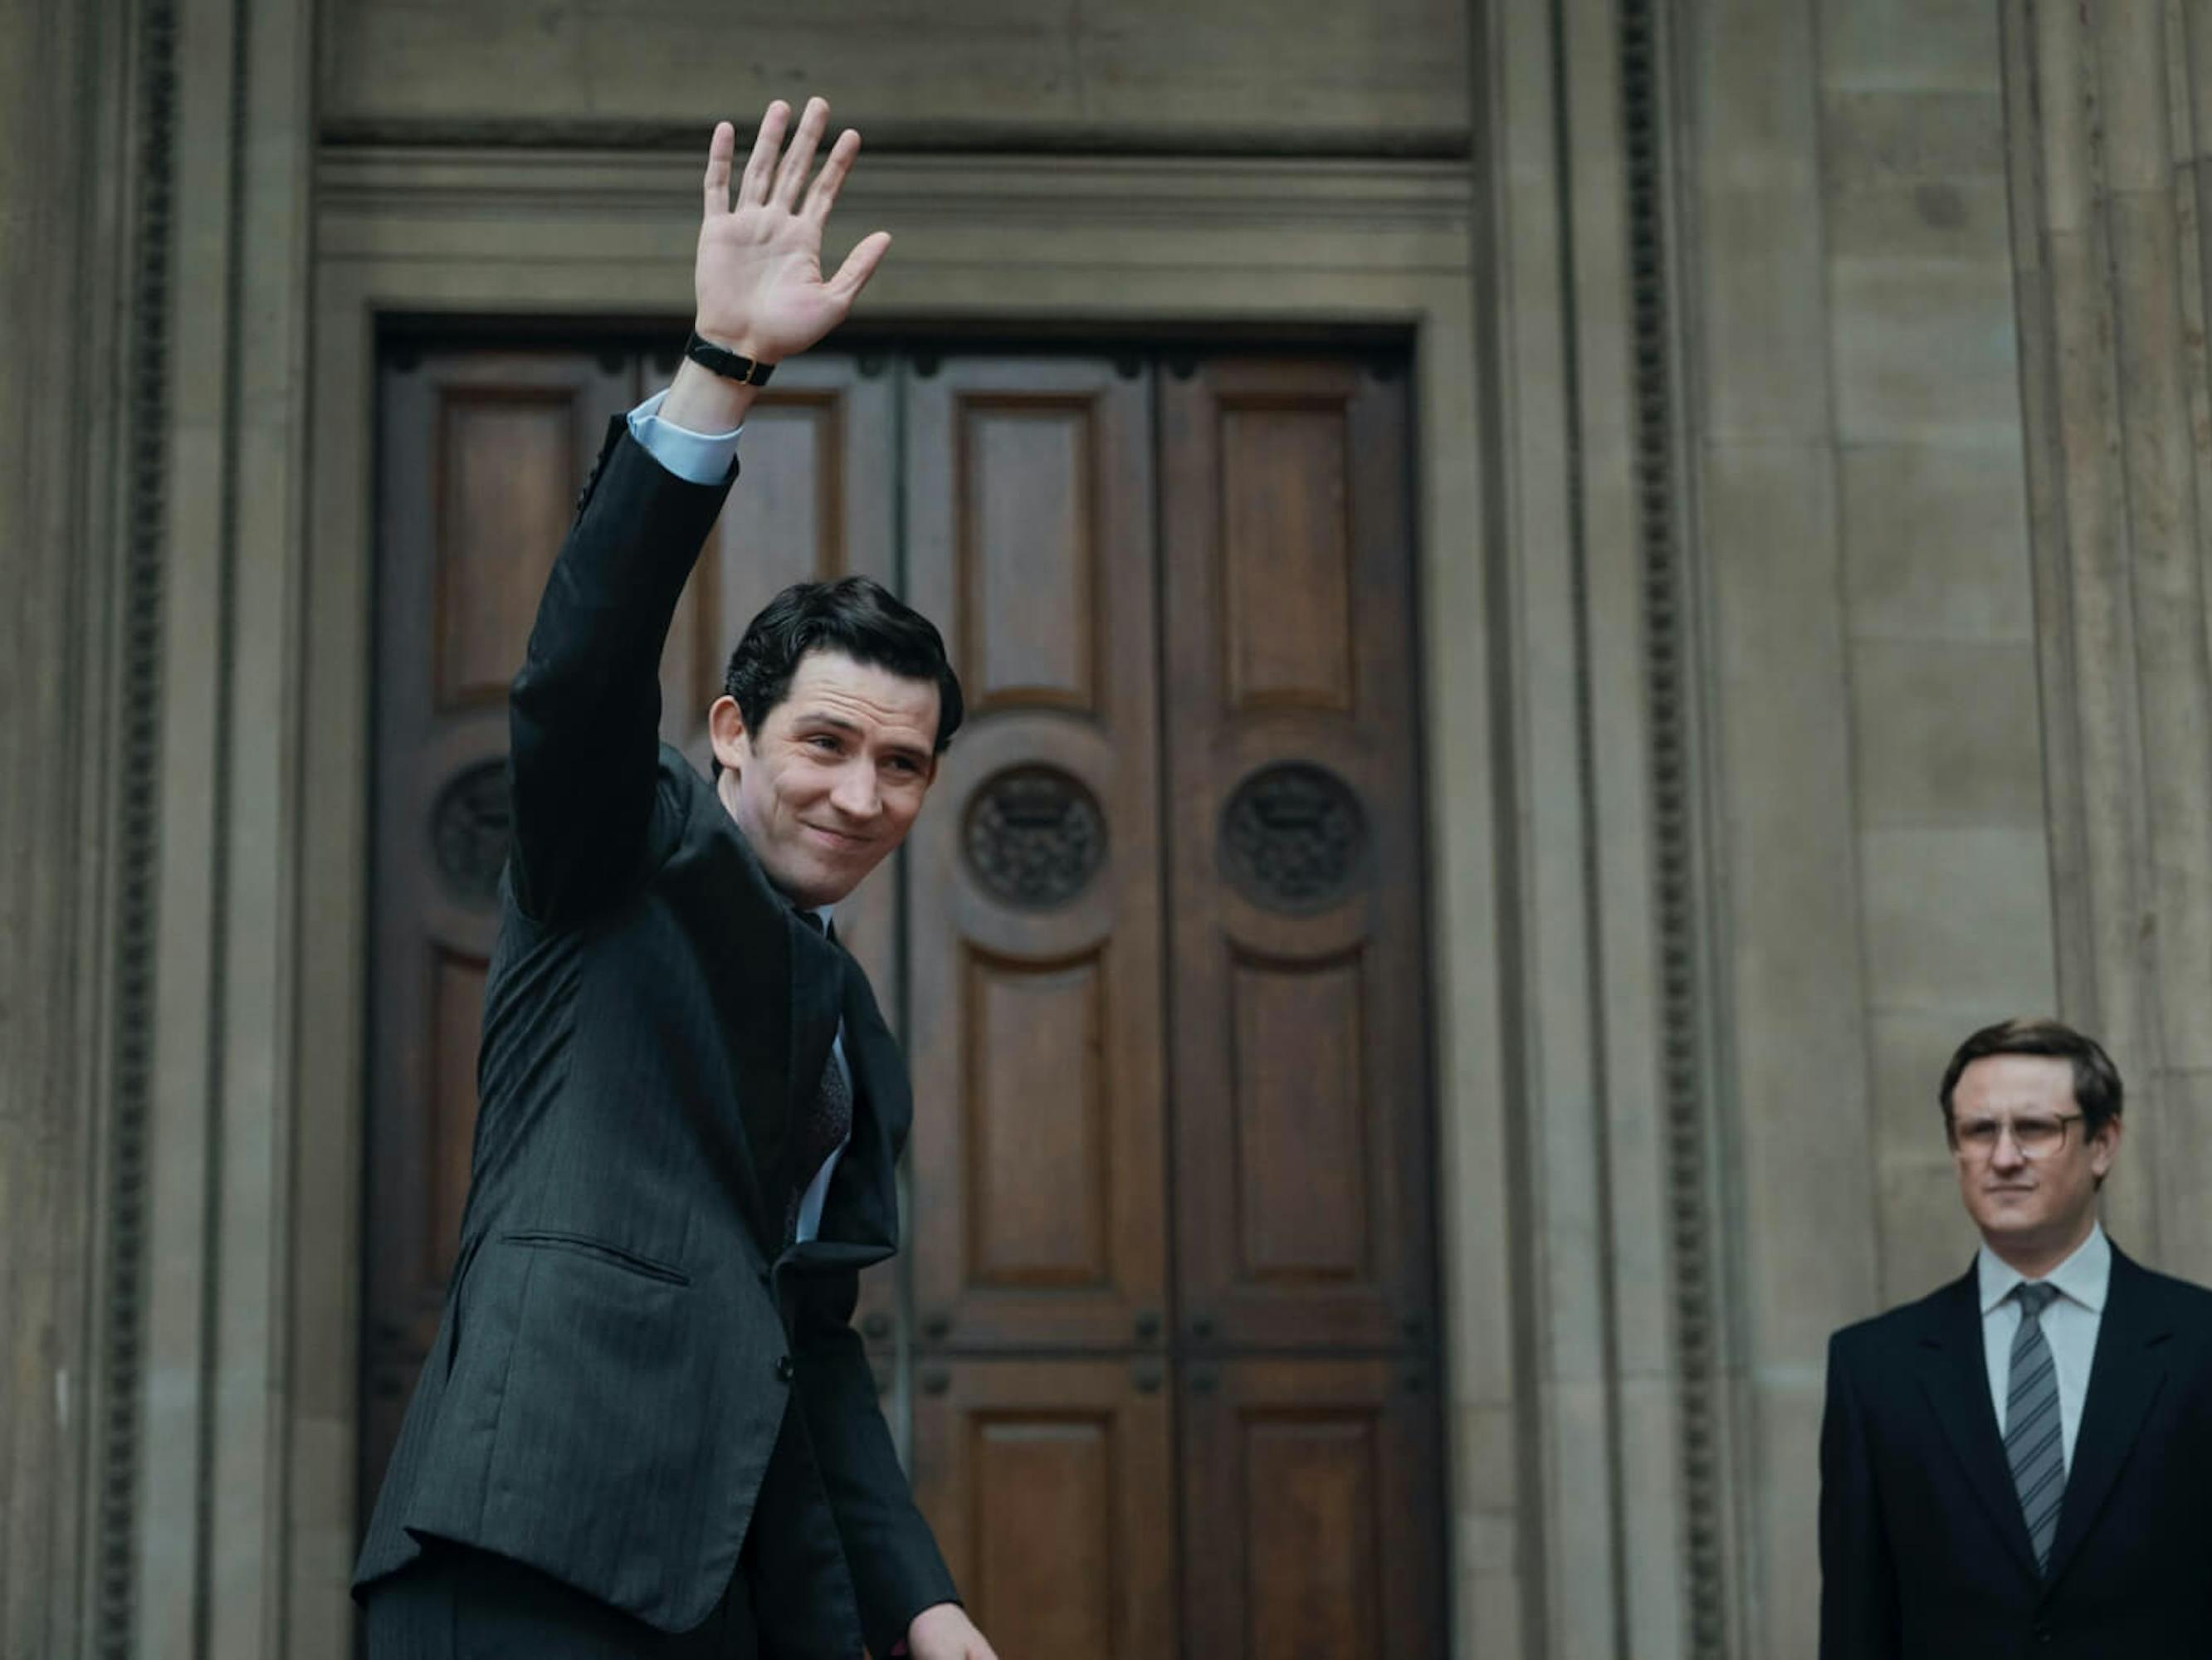 Prince Charles (Josh O’Connor) waves in a dark suit. Behind him is another suited man, and an impressive wooden door.